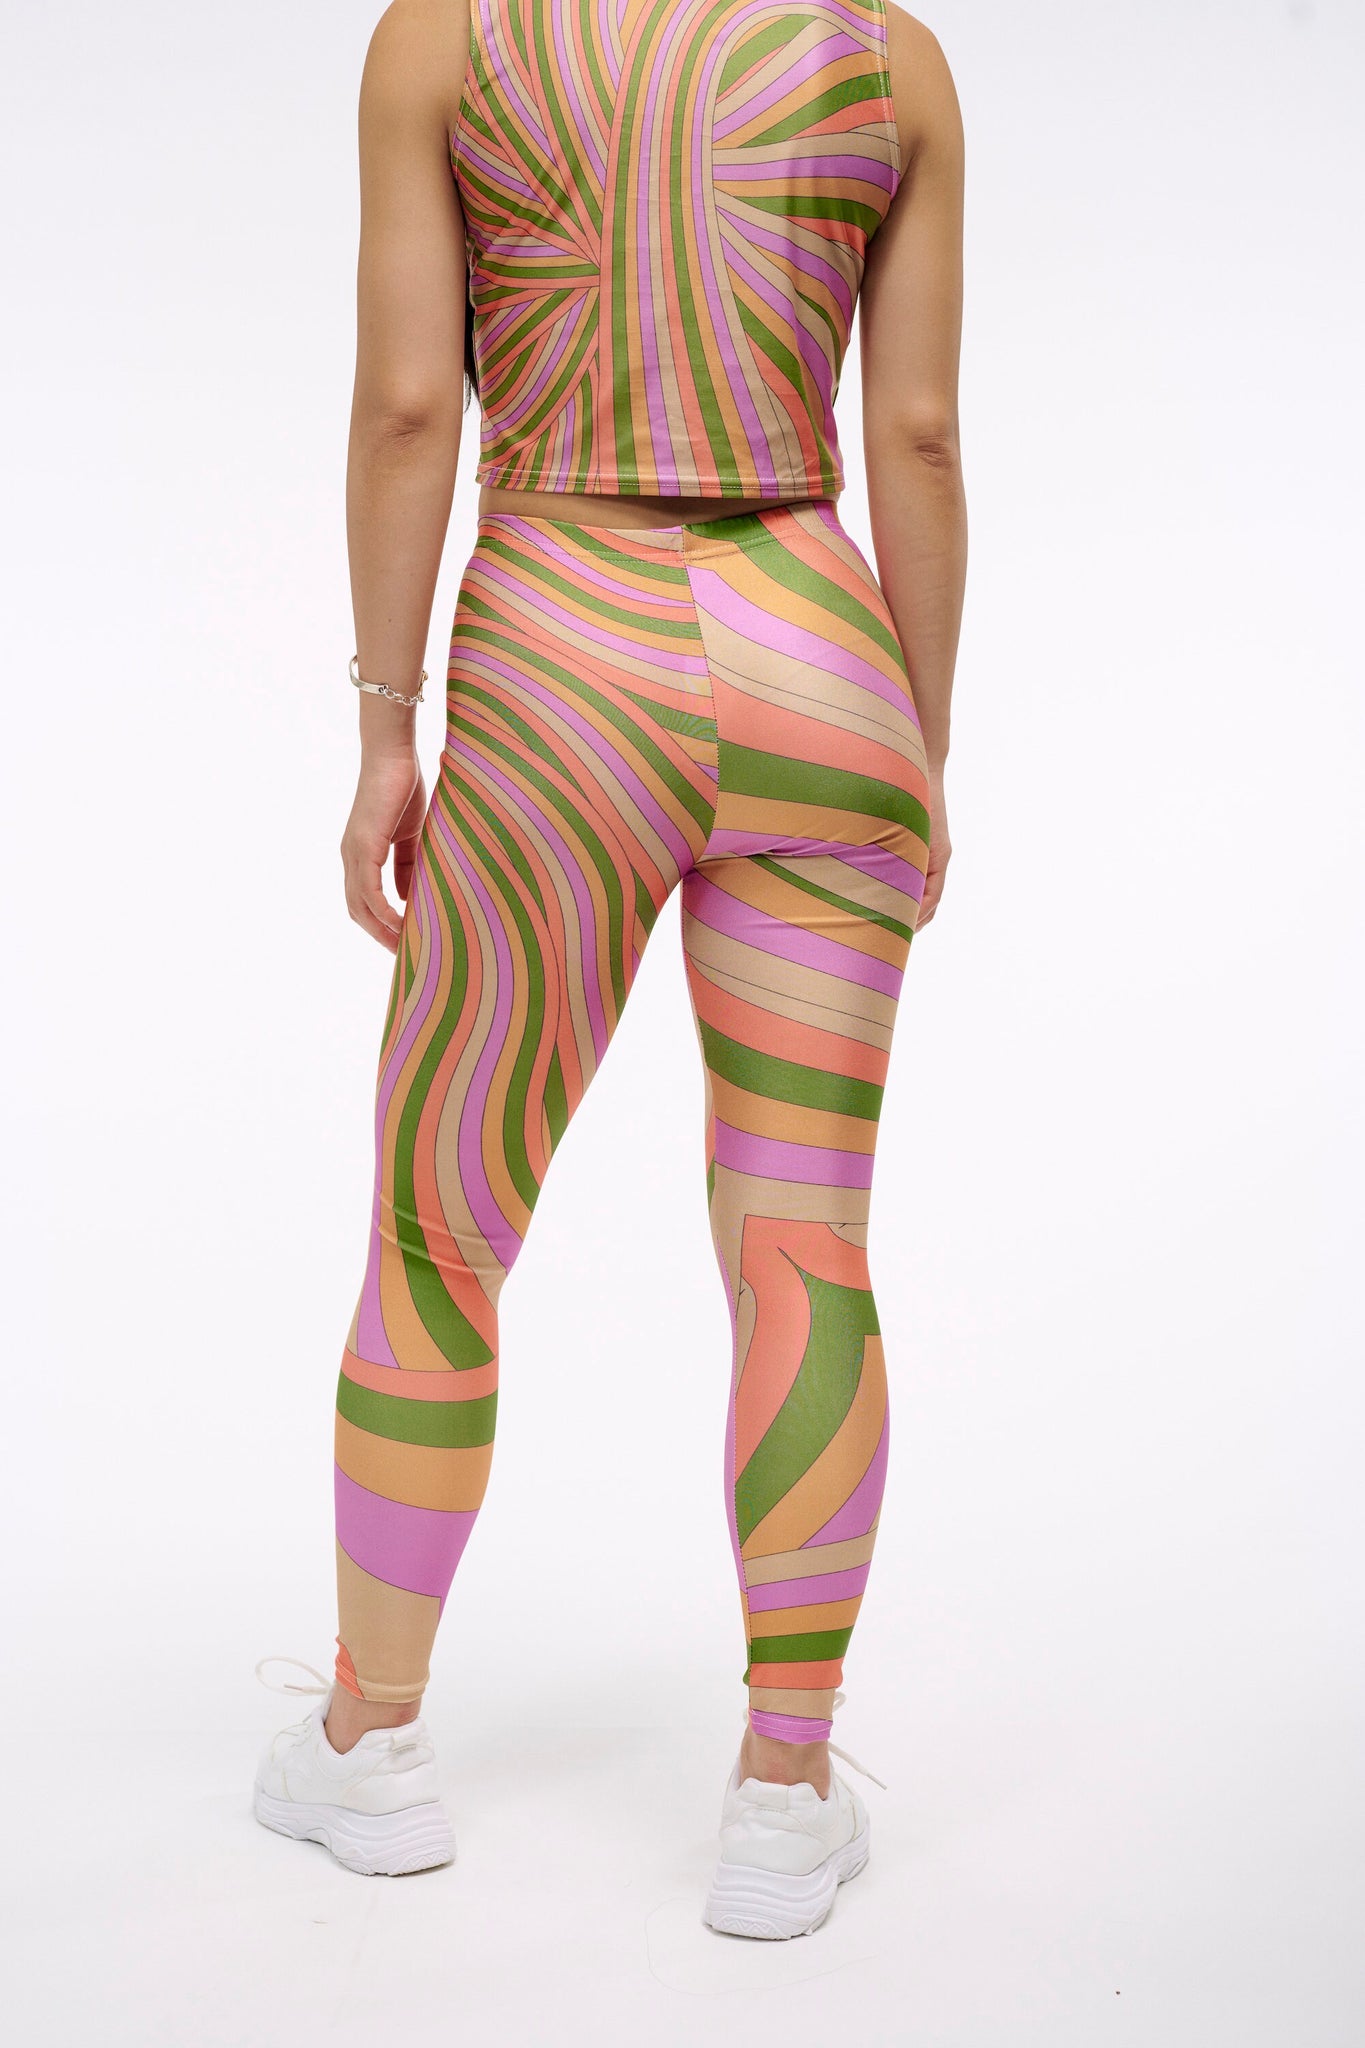 The Party Colored Candy Legging | A Kaleidoscopic Wonder for the Decadent | Swirling Pastel Groovy Printed Thick Legging | Goose Taffy